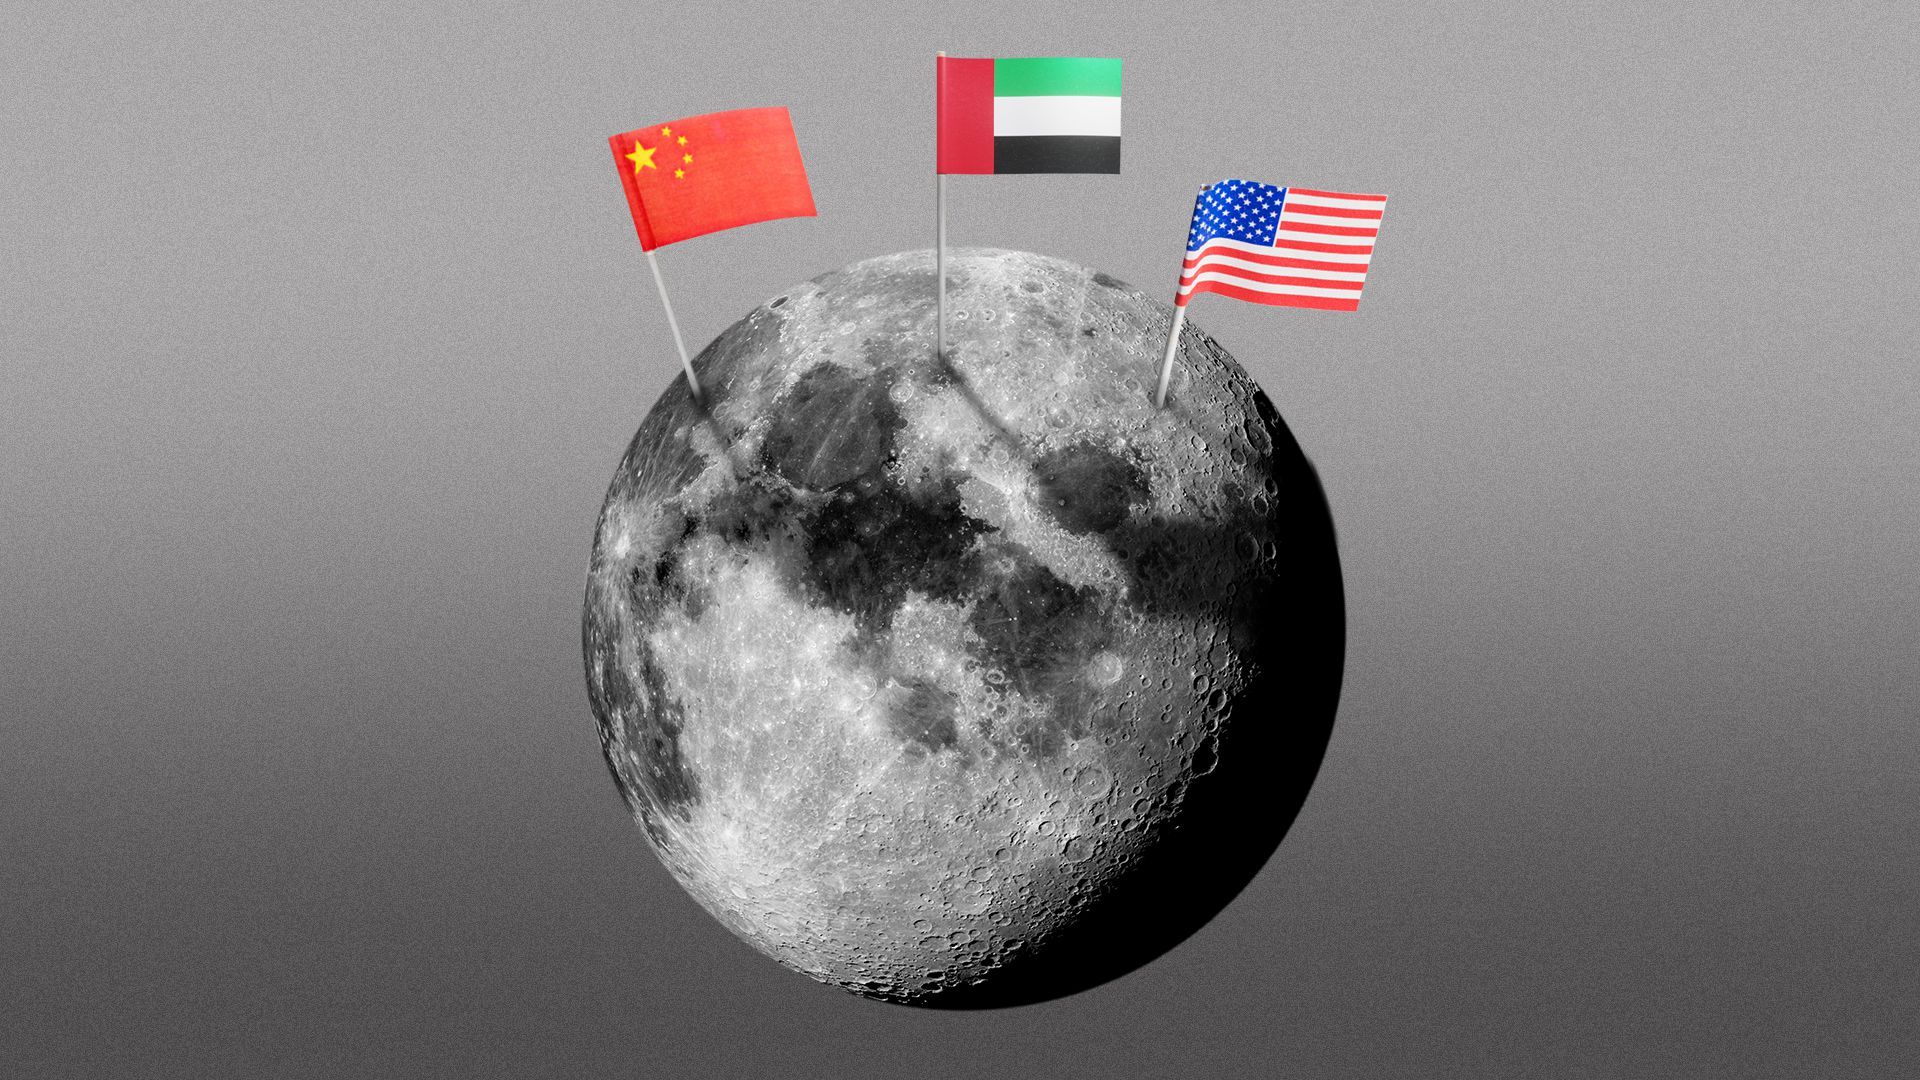 Illustration of the moon with China, UAE and USA flags planted at the top